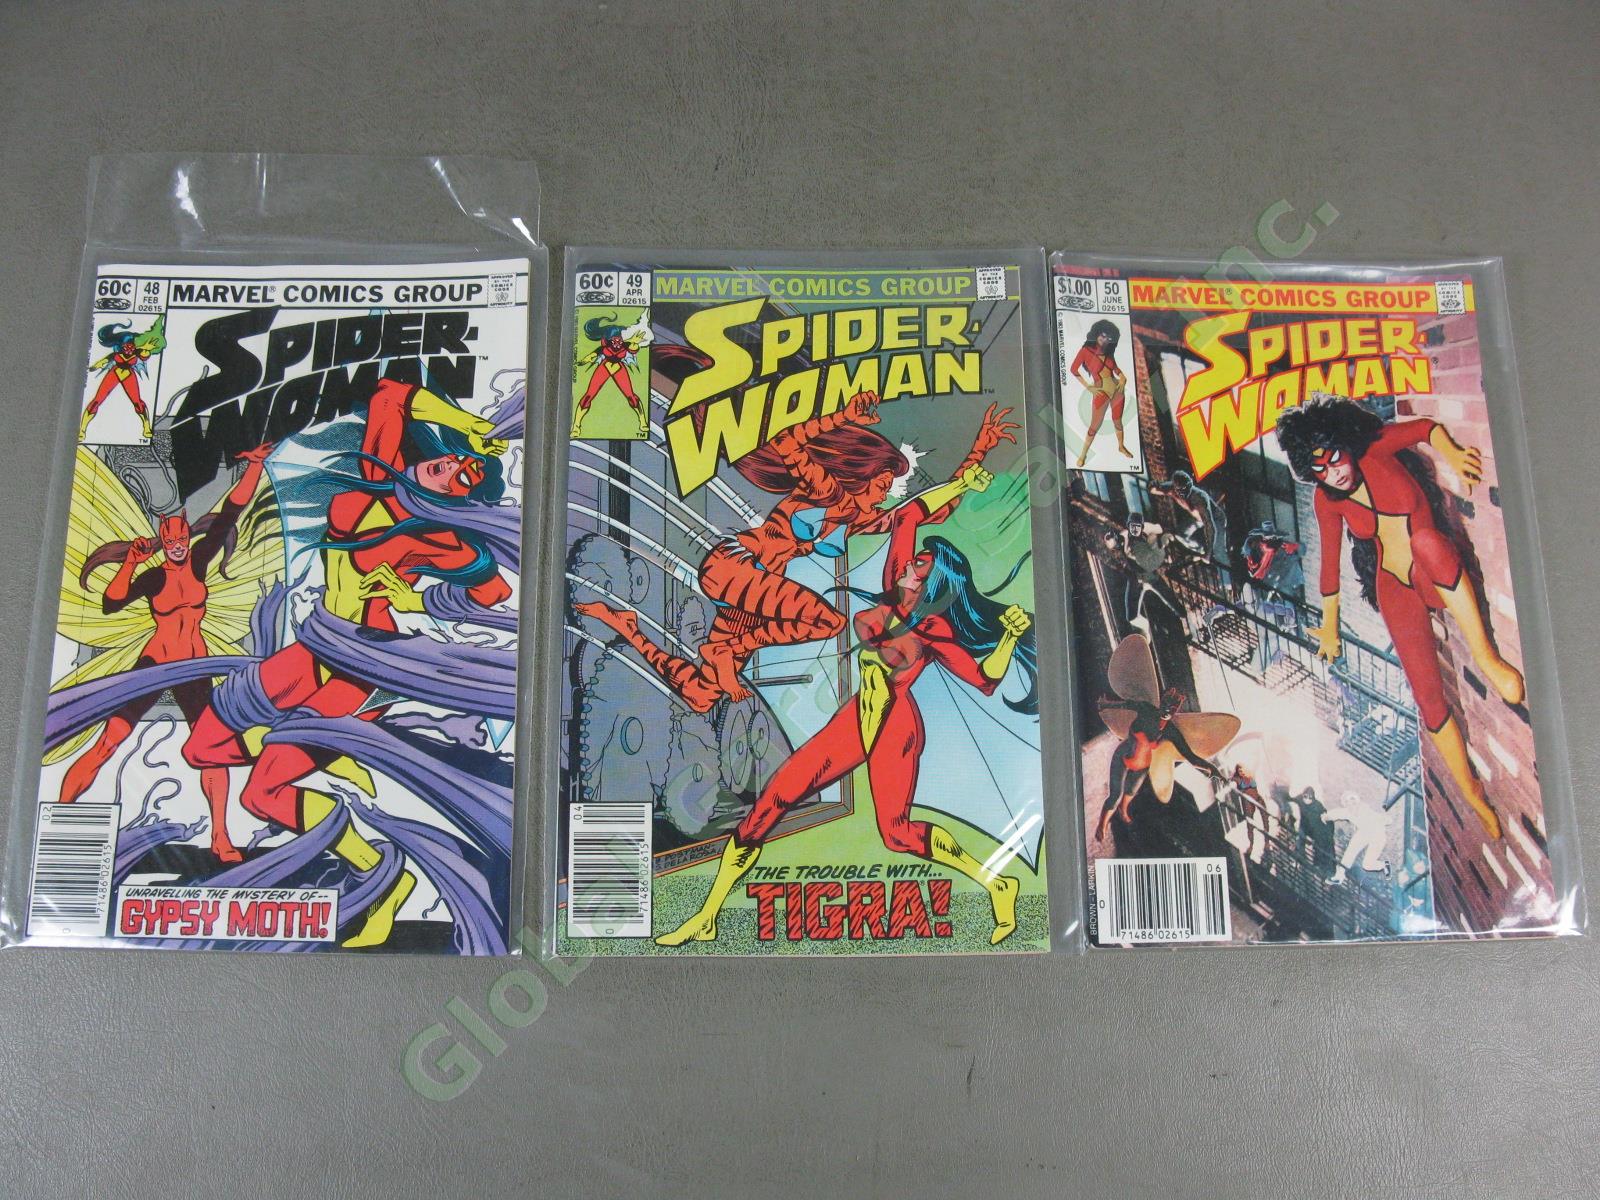 48 Vtg Marvel Spider-Woman Comic Book Collection Lot Runs 1-8 10-36 38-40 42-50 14